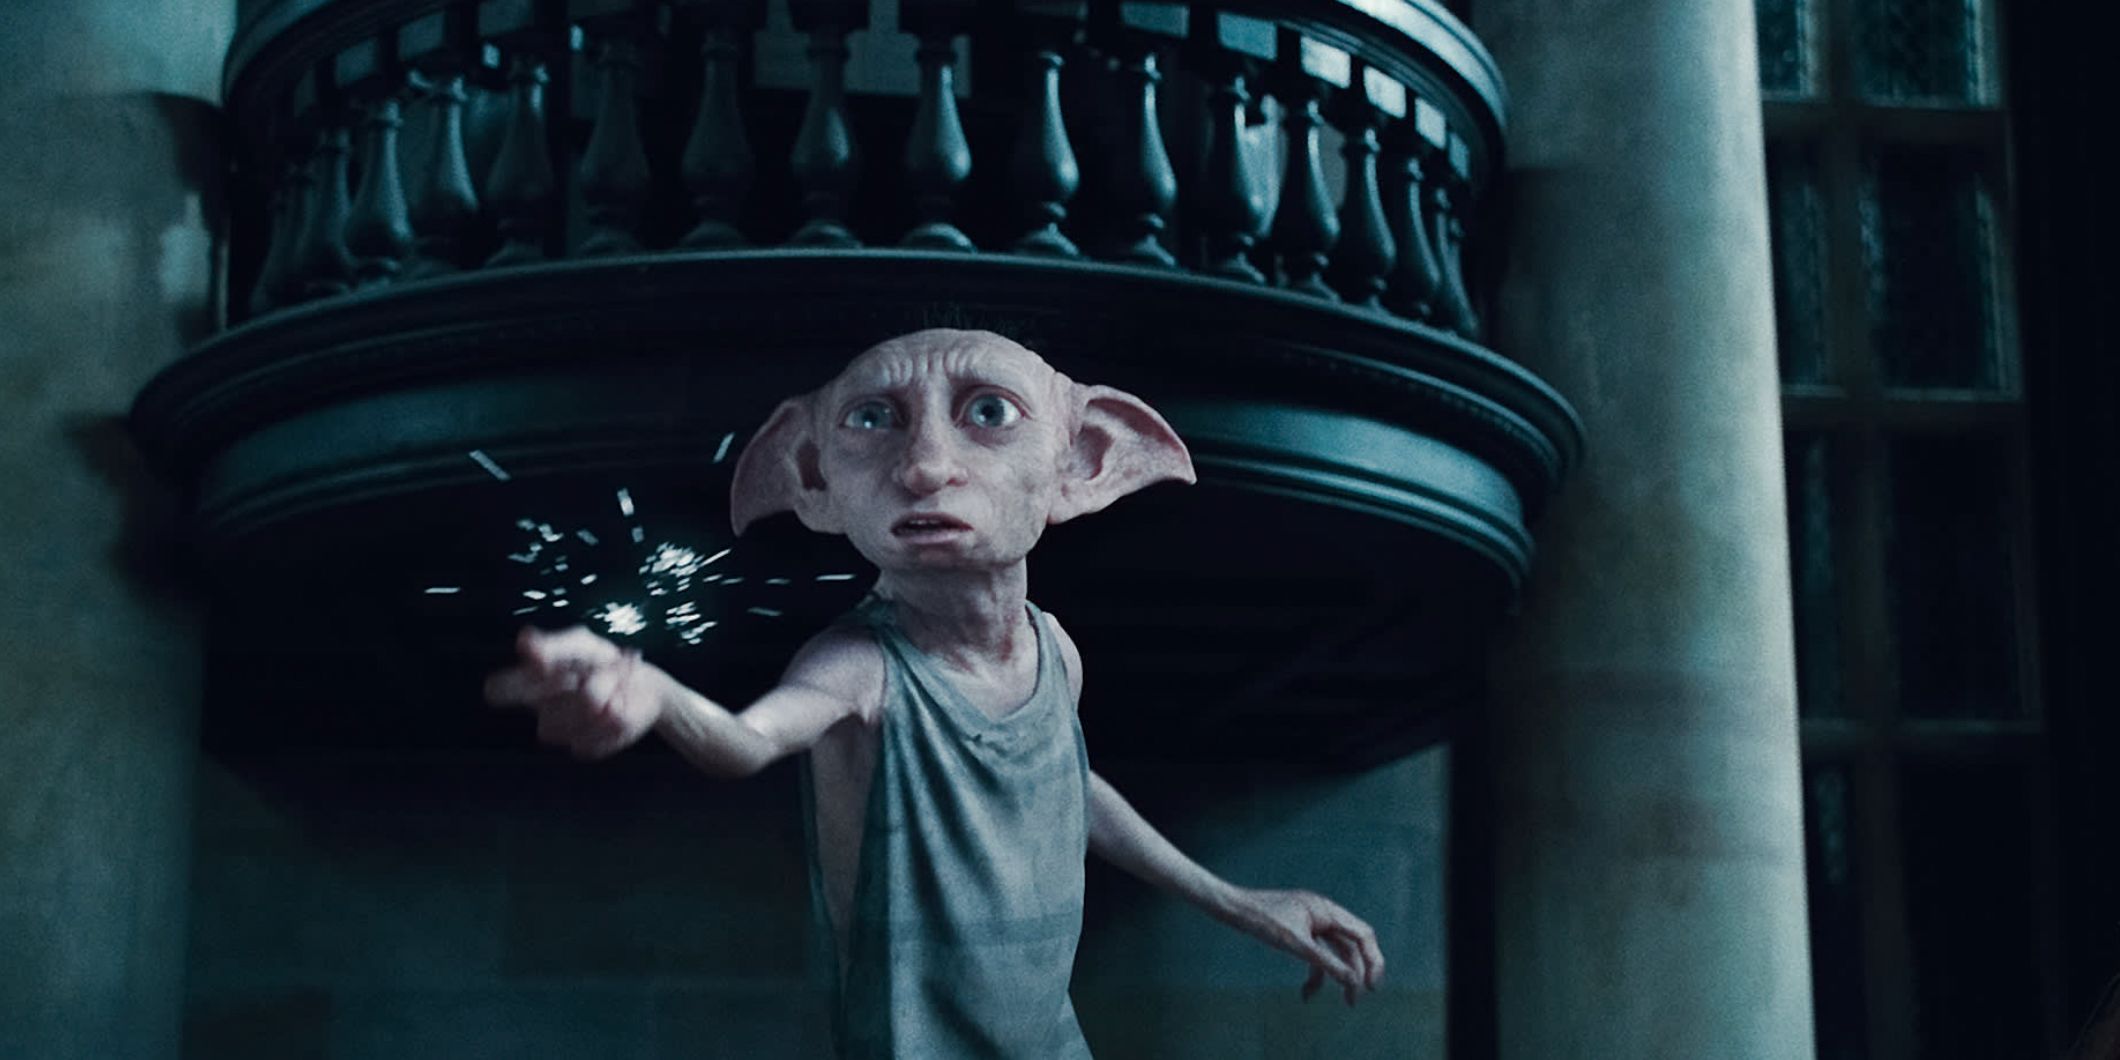 Dobby snapping his fingers in Harry Potter and the Deathly Hallows